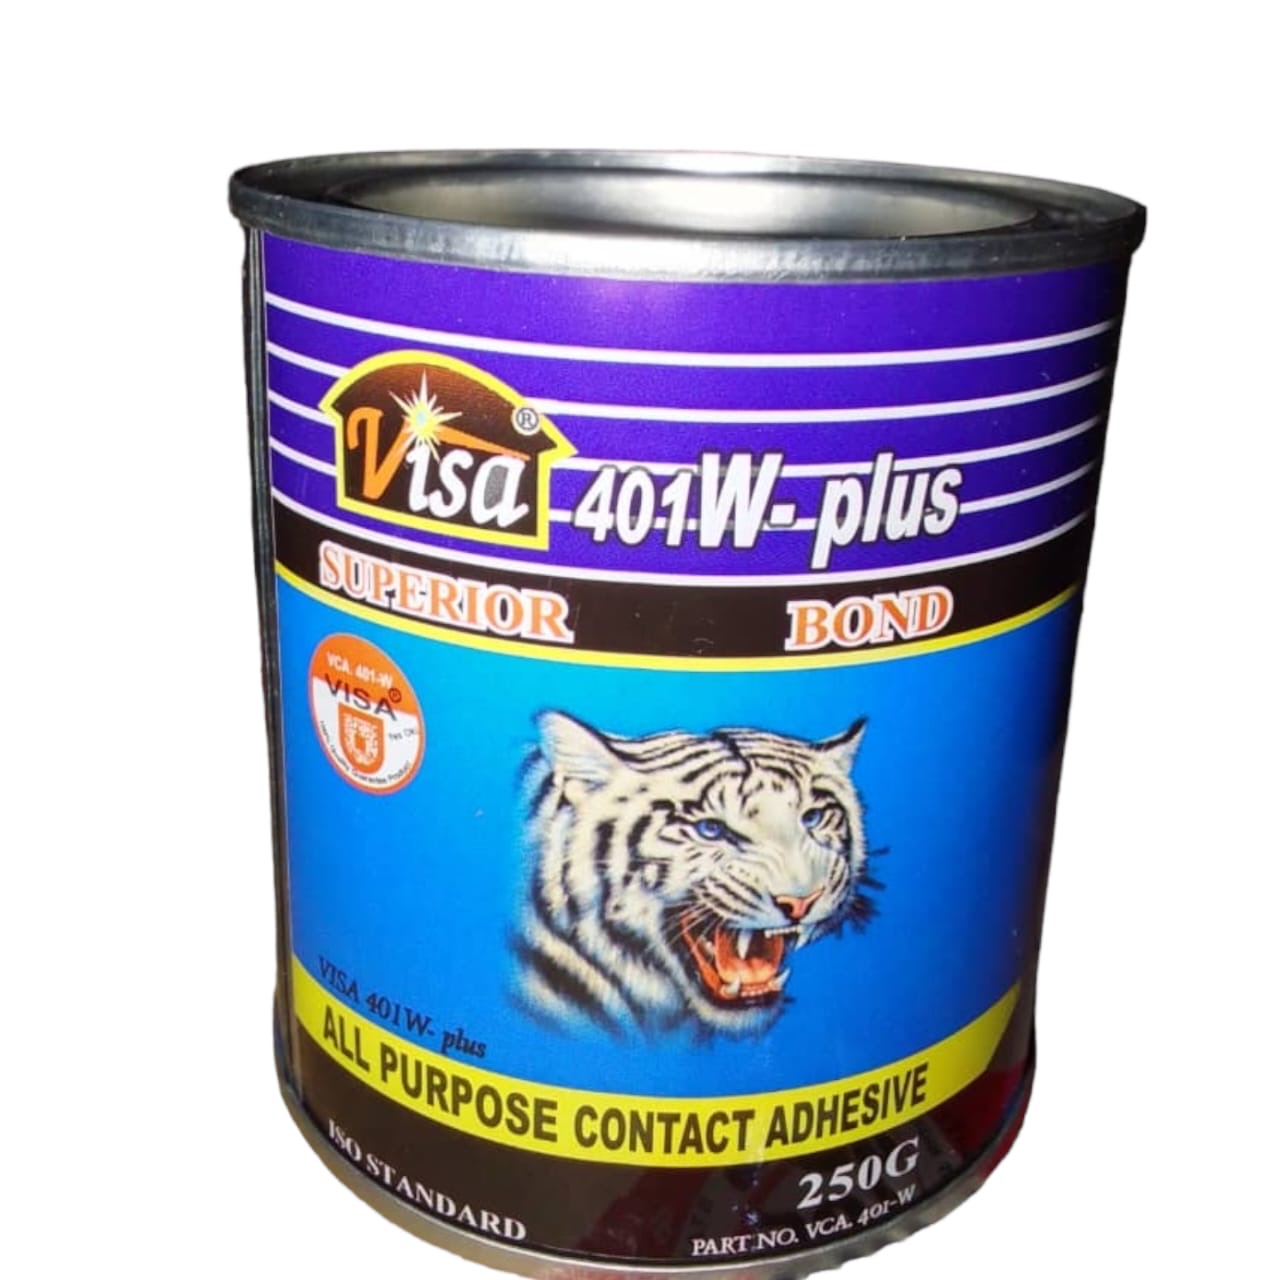 VISA® ALL PURPOSE CONTACT ADHESIVE 404E-S - EXTRA STRONG (3kg)